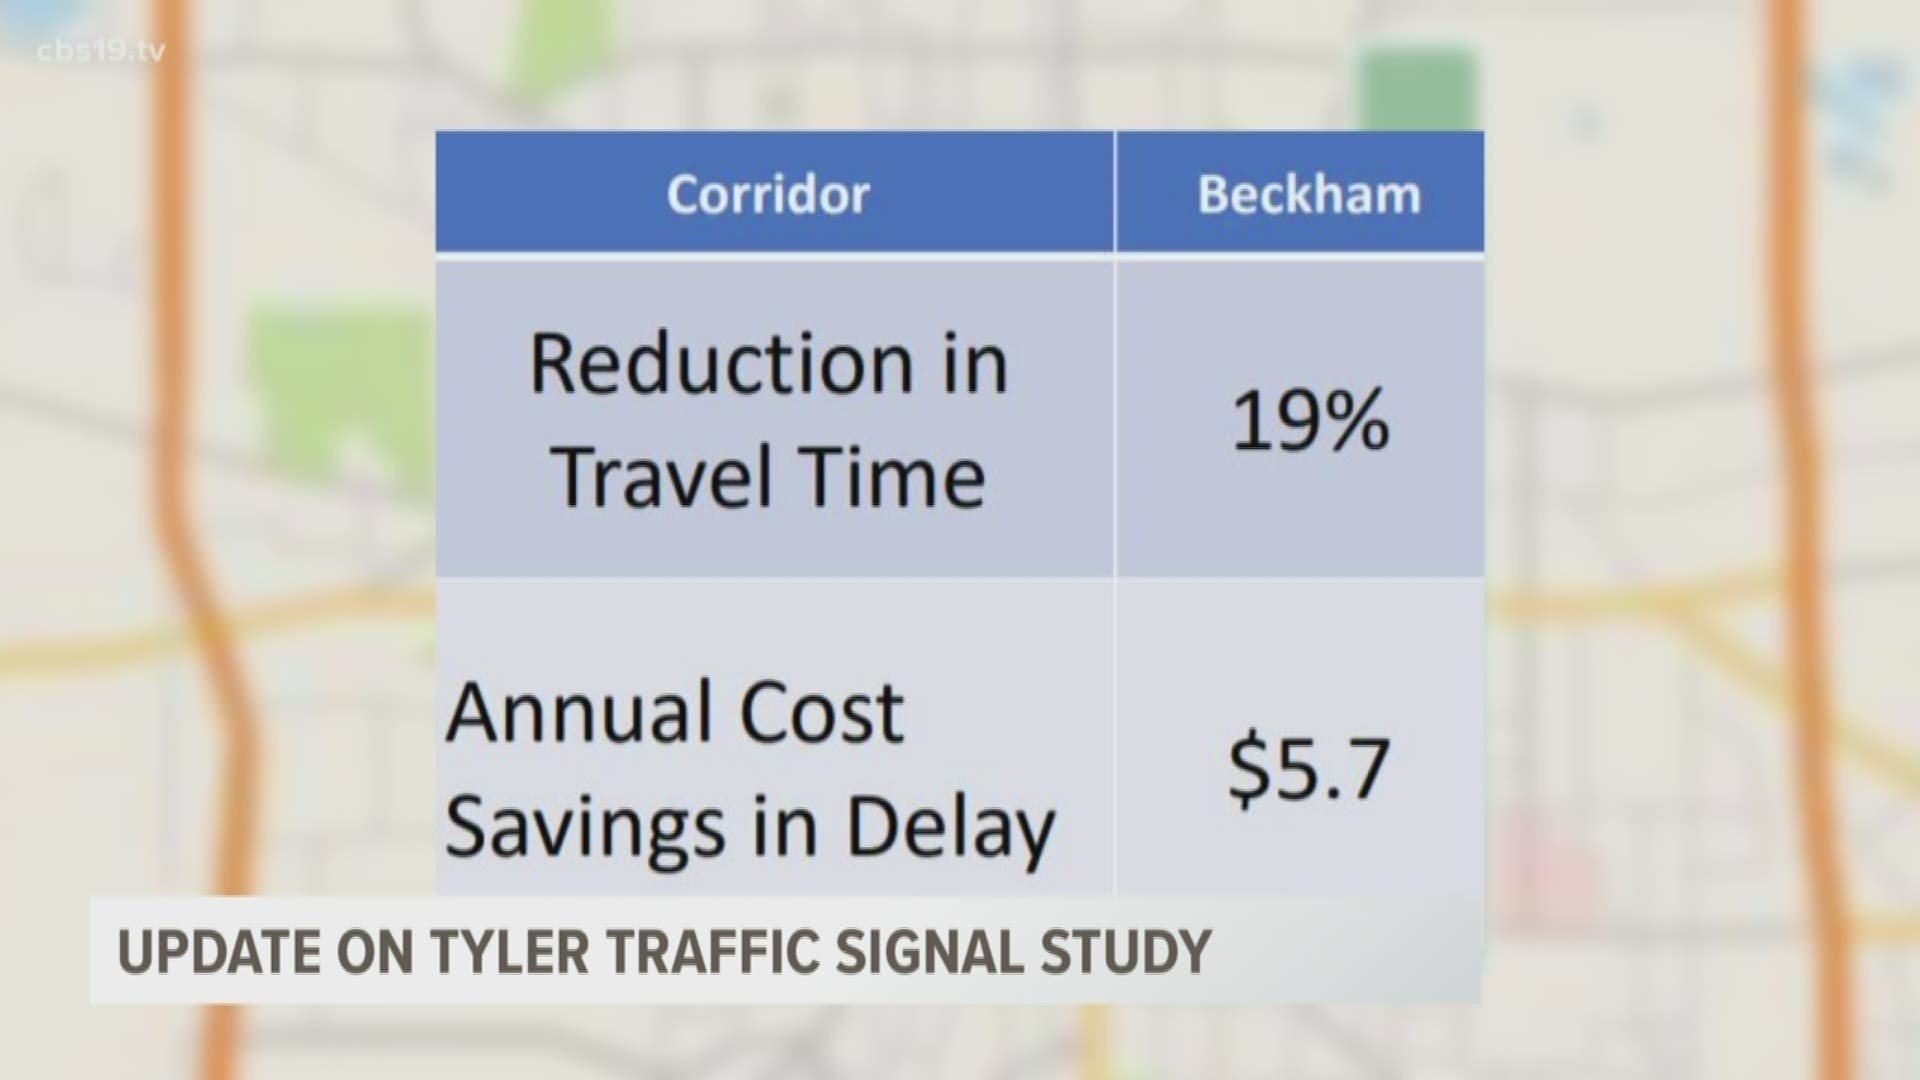 The Tyler City Council approved a year-long traffic signal study in April. During Wednesday’s meeting, they were given an update.